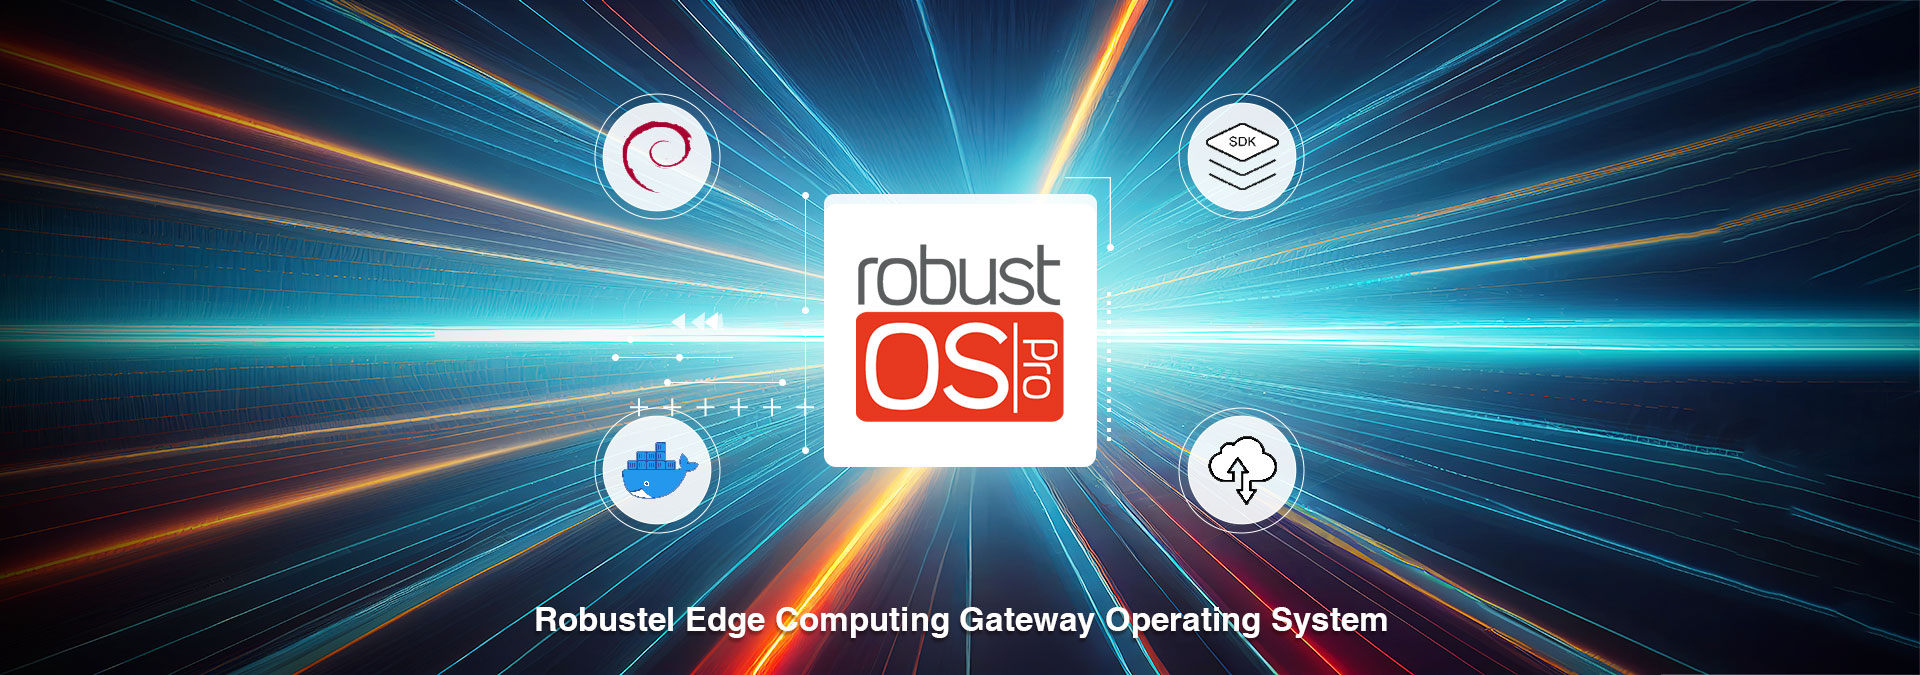 Robust-OS-pro-banner-1(1)